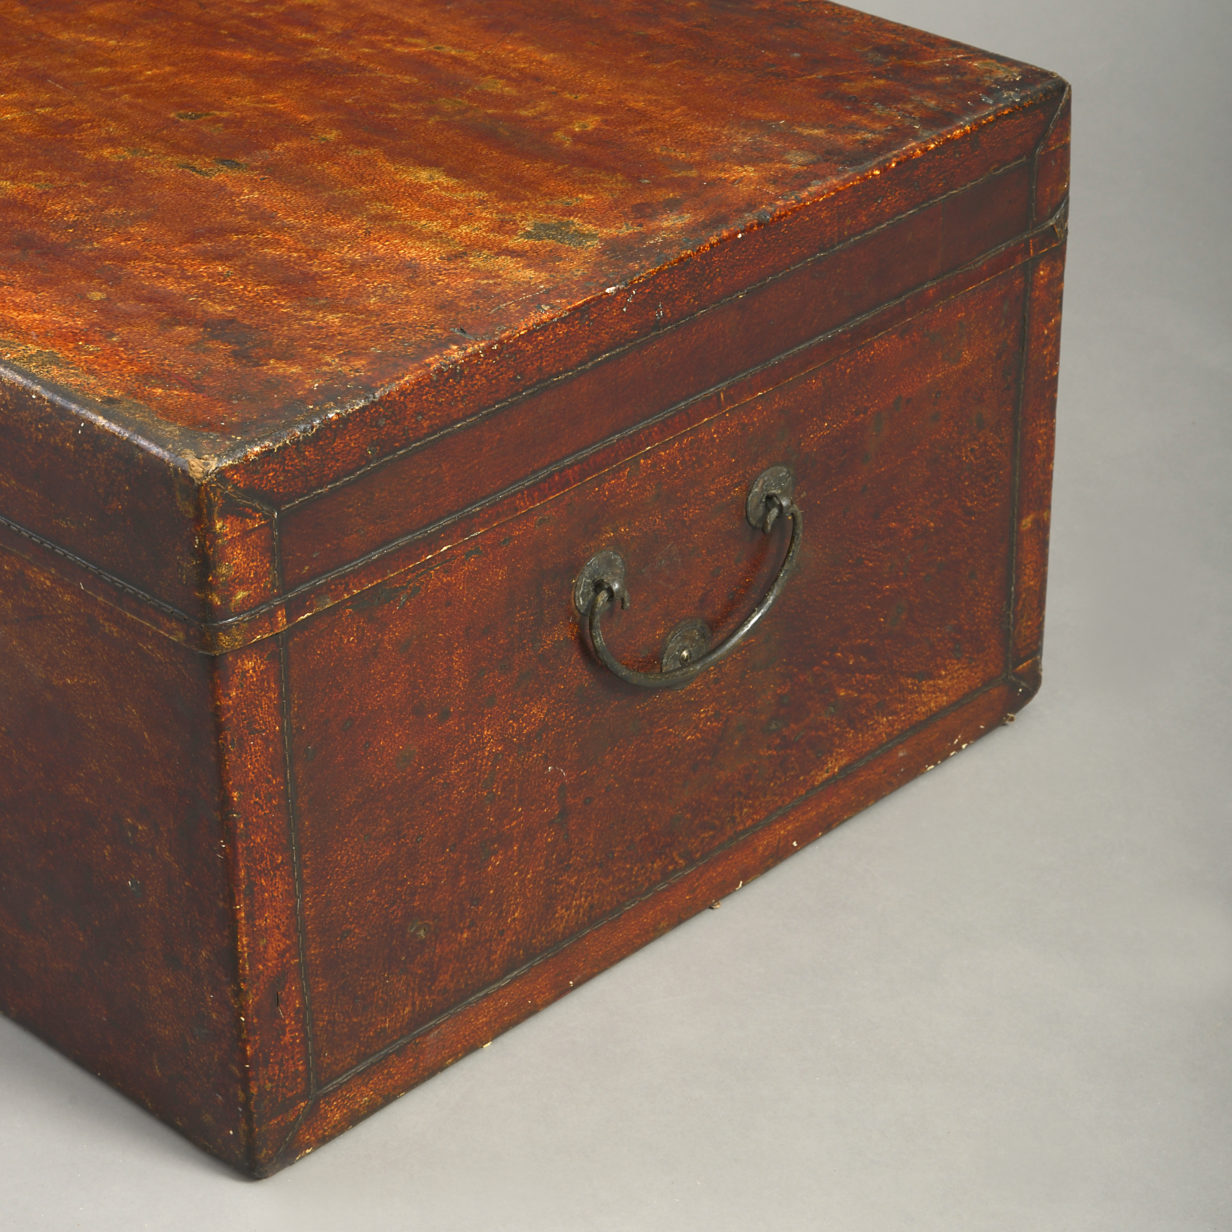 19th century red leather trunk